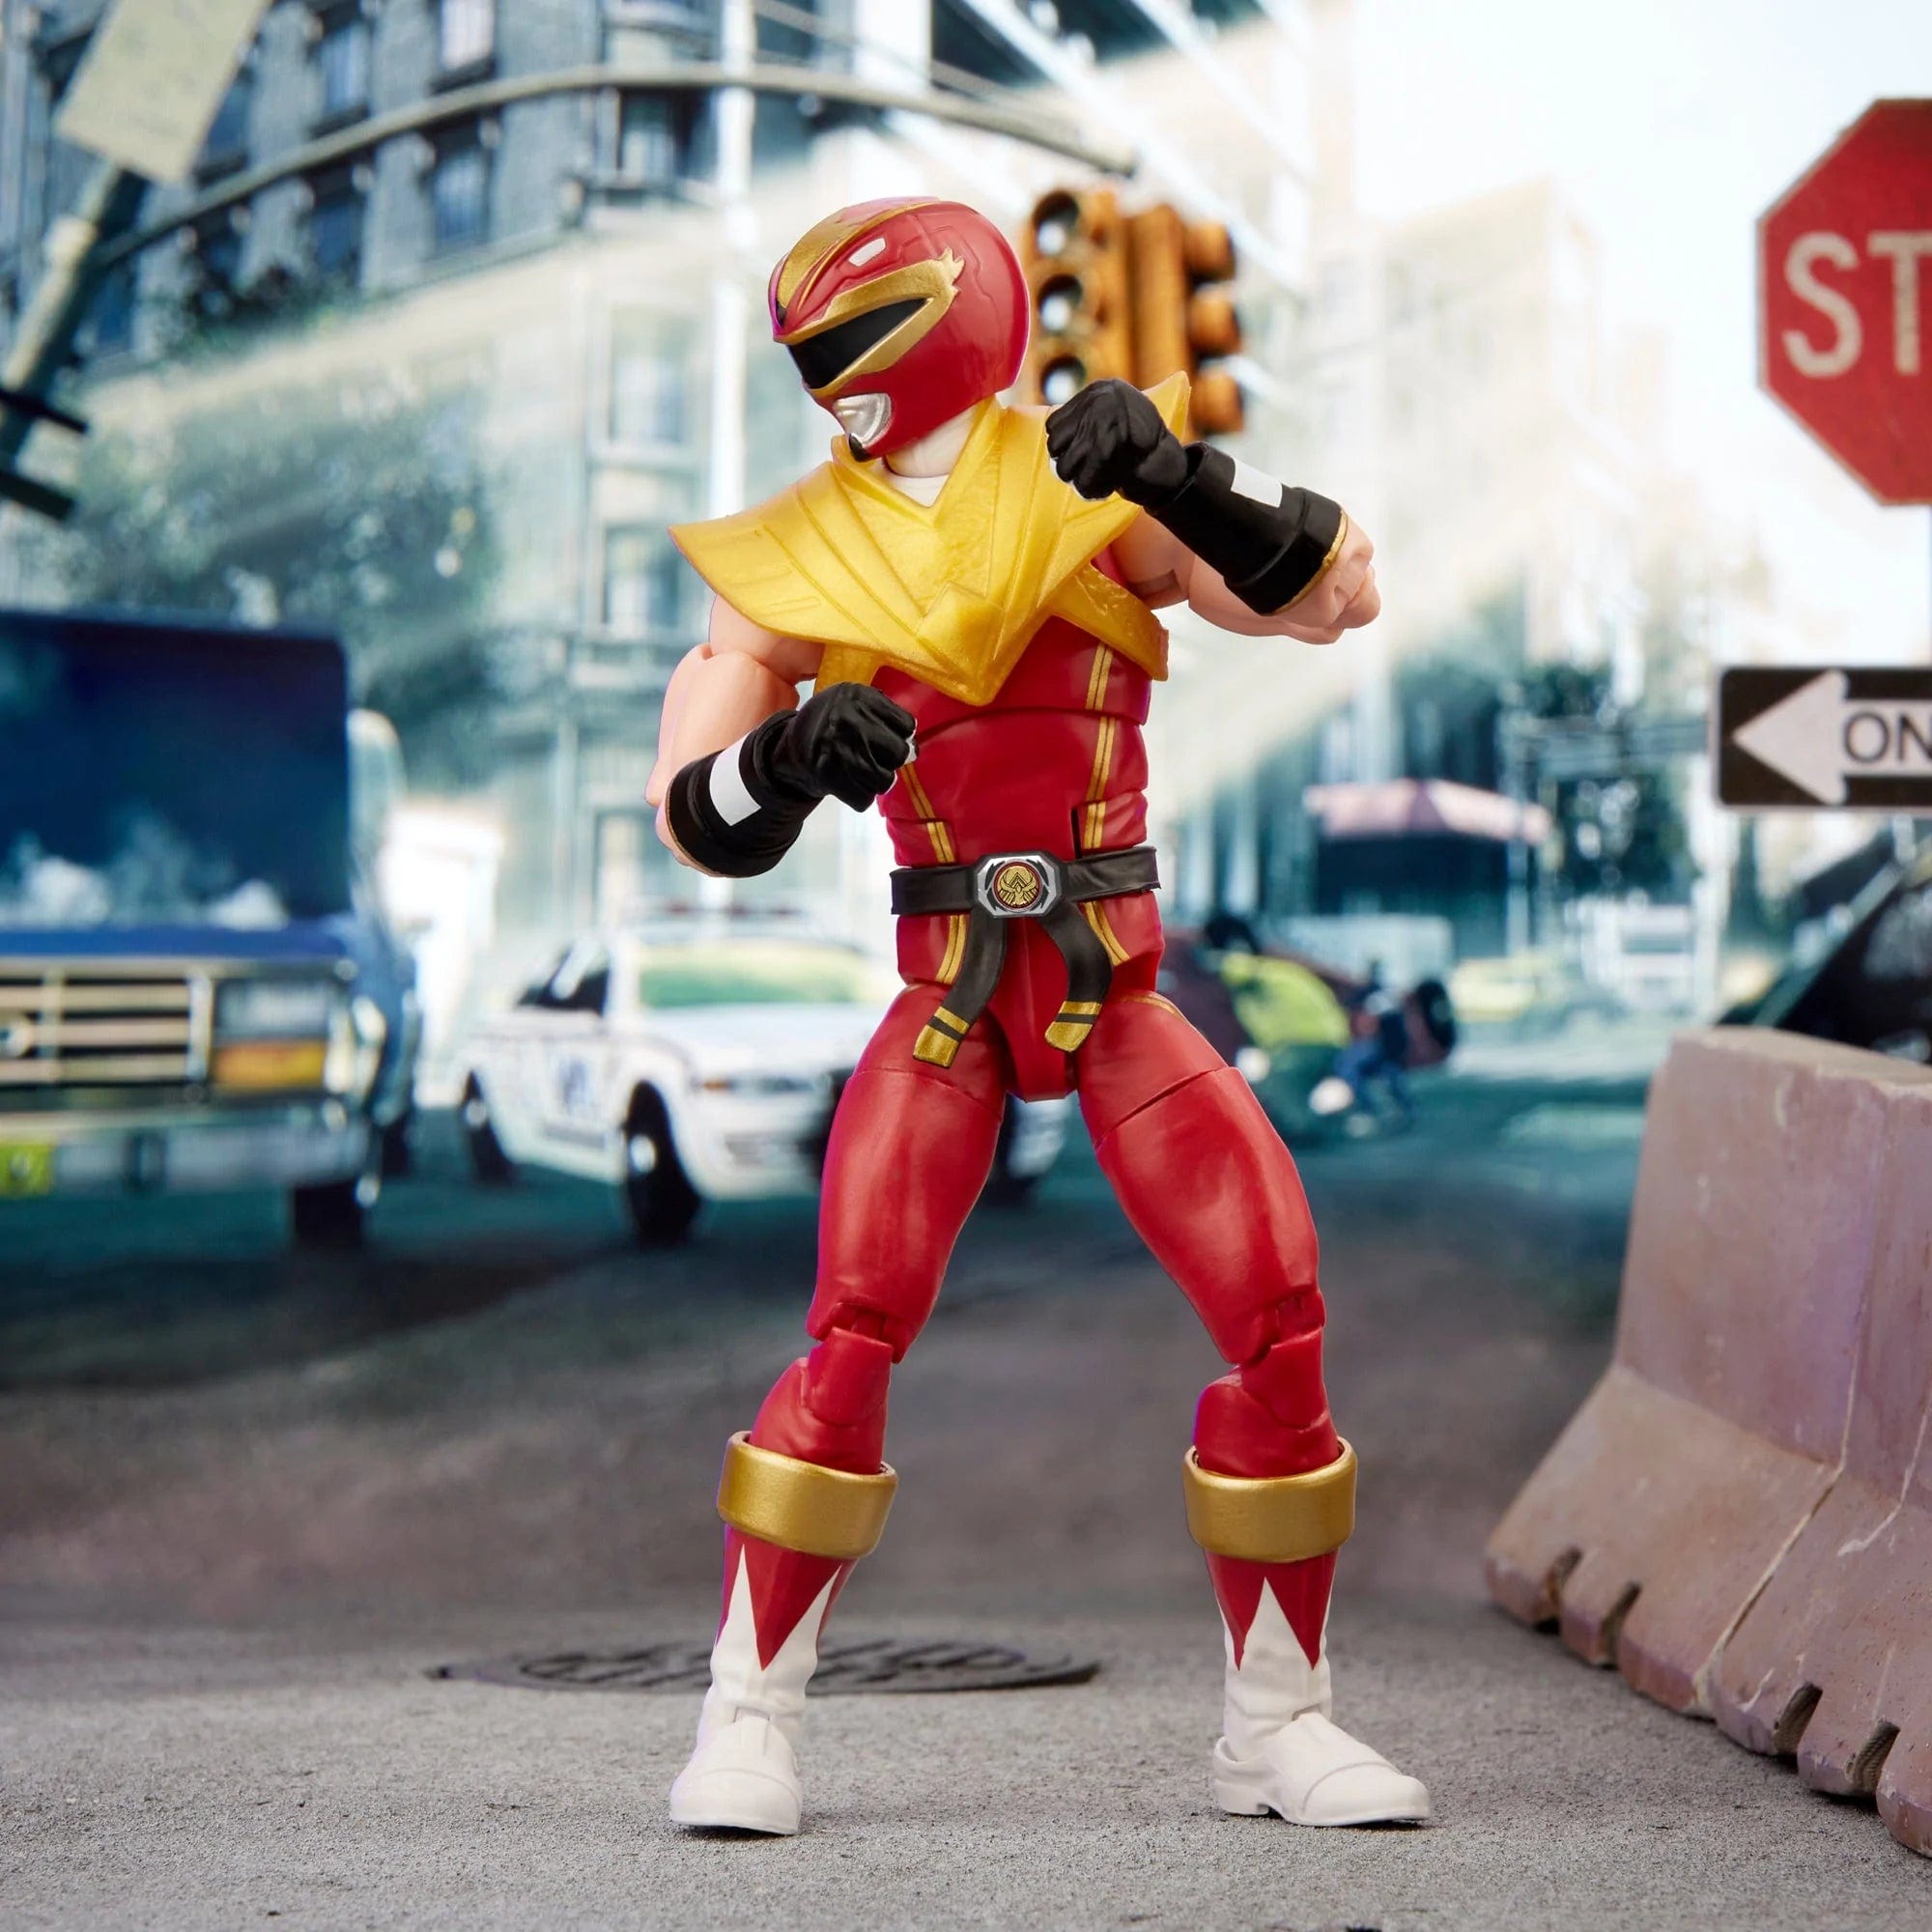 Power Rangers X Street Fighter Lightning Collection Morphed Ken Soaring Falcon Media Fight pose